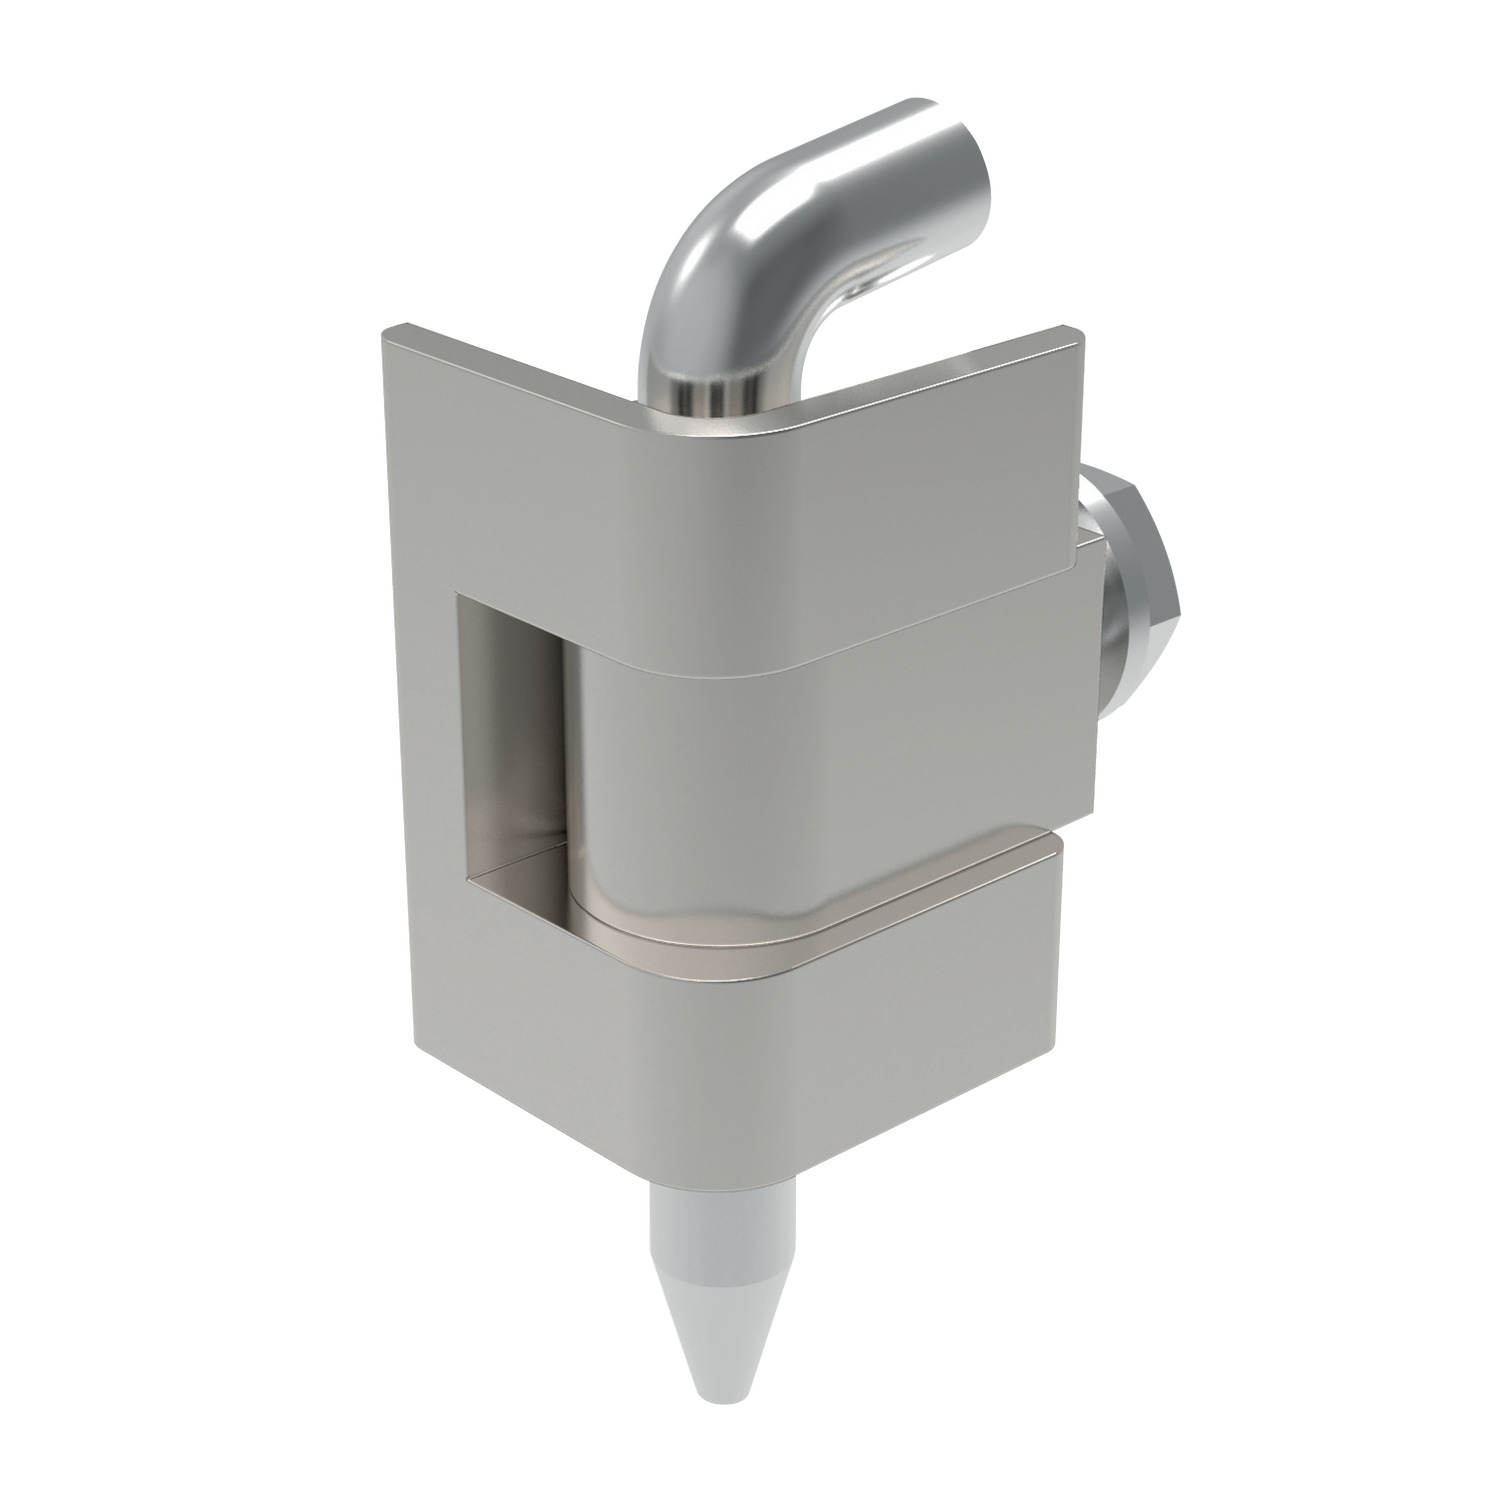 Corner Hinge 19 - 21mm Door Return Stainless steel corner hinge, cut out and integrated stud. For sheet metal enclosures (up to 2mm thick).